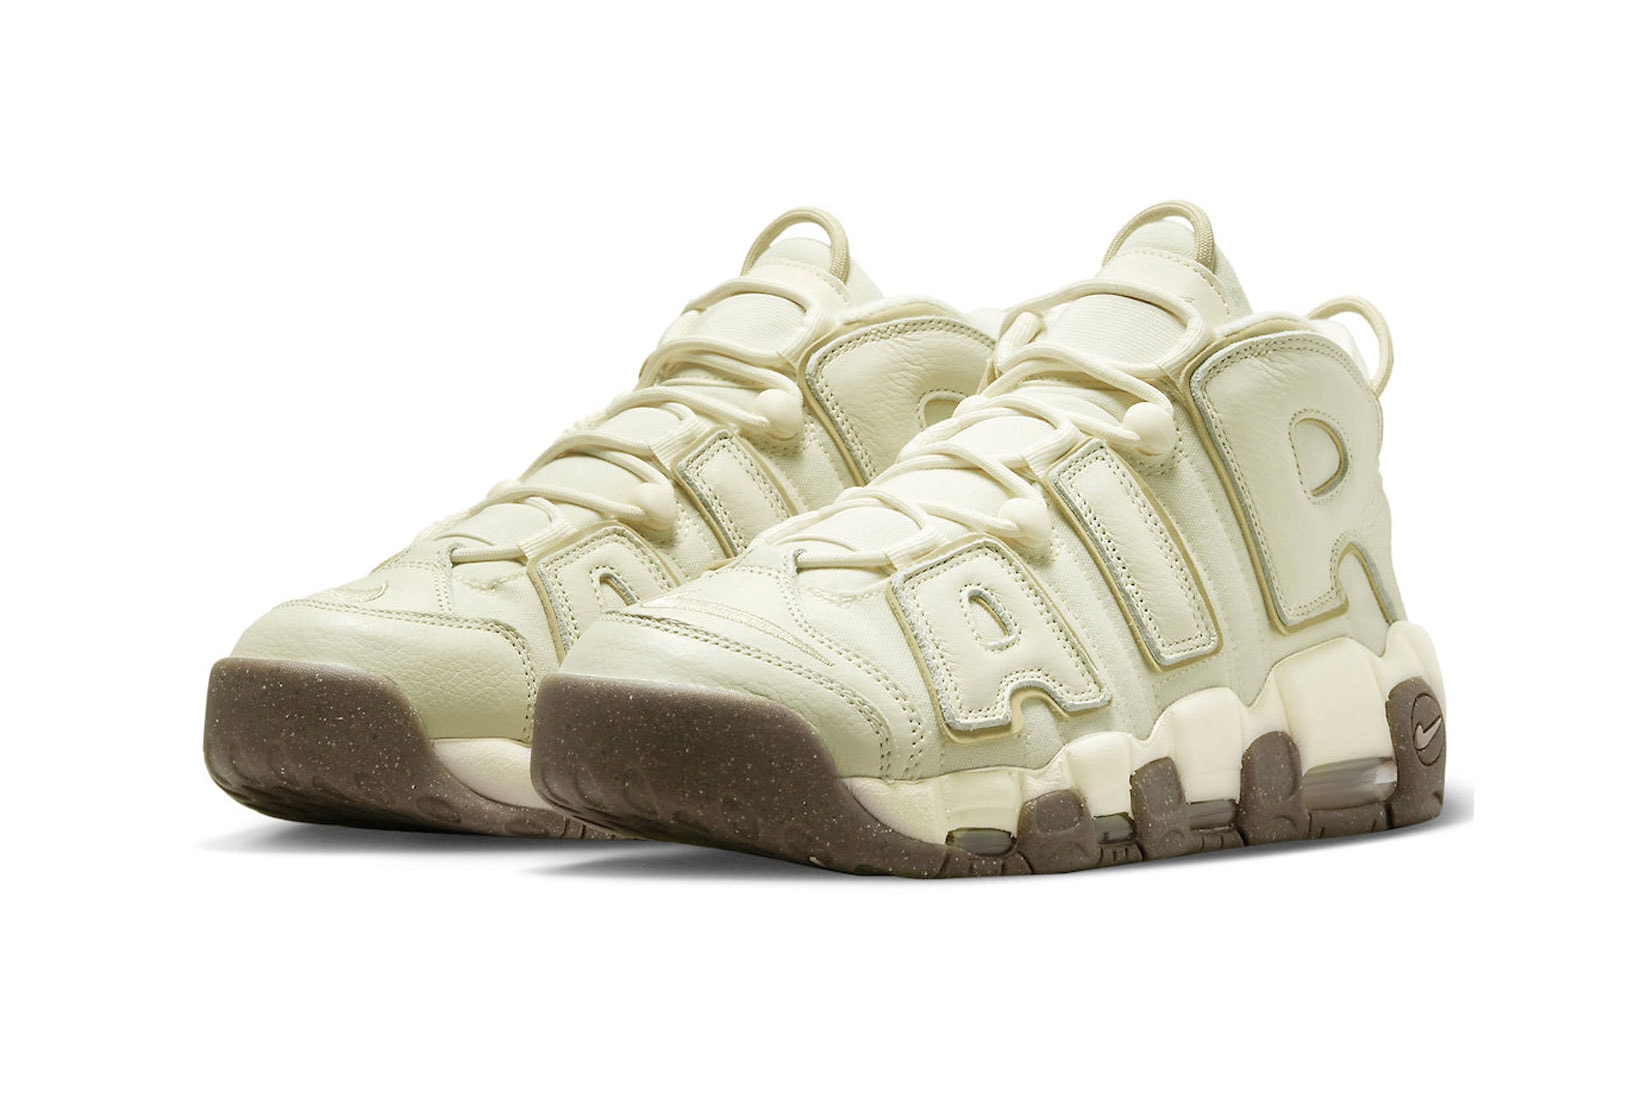 Nike Air More Uptempo "Coconut Milk" Beige White Images Release Info